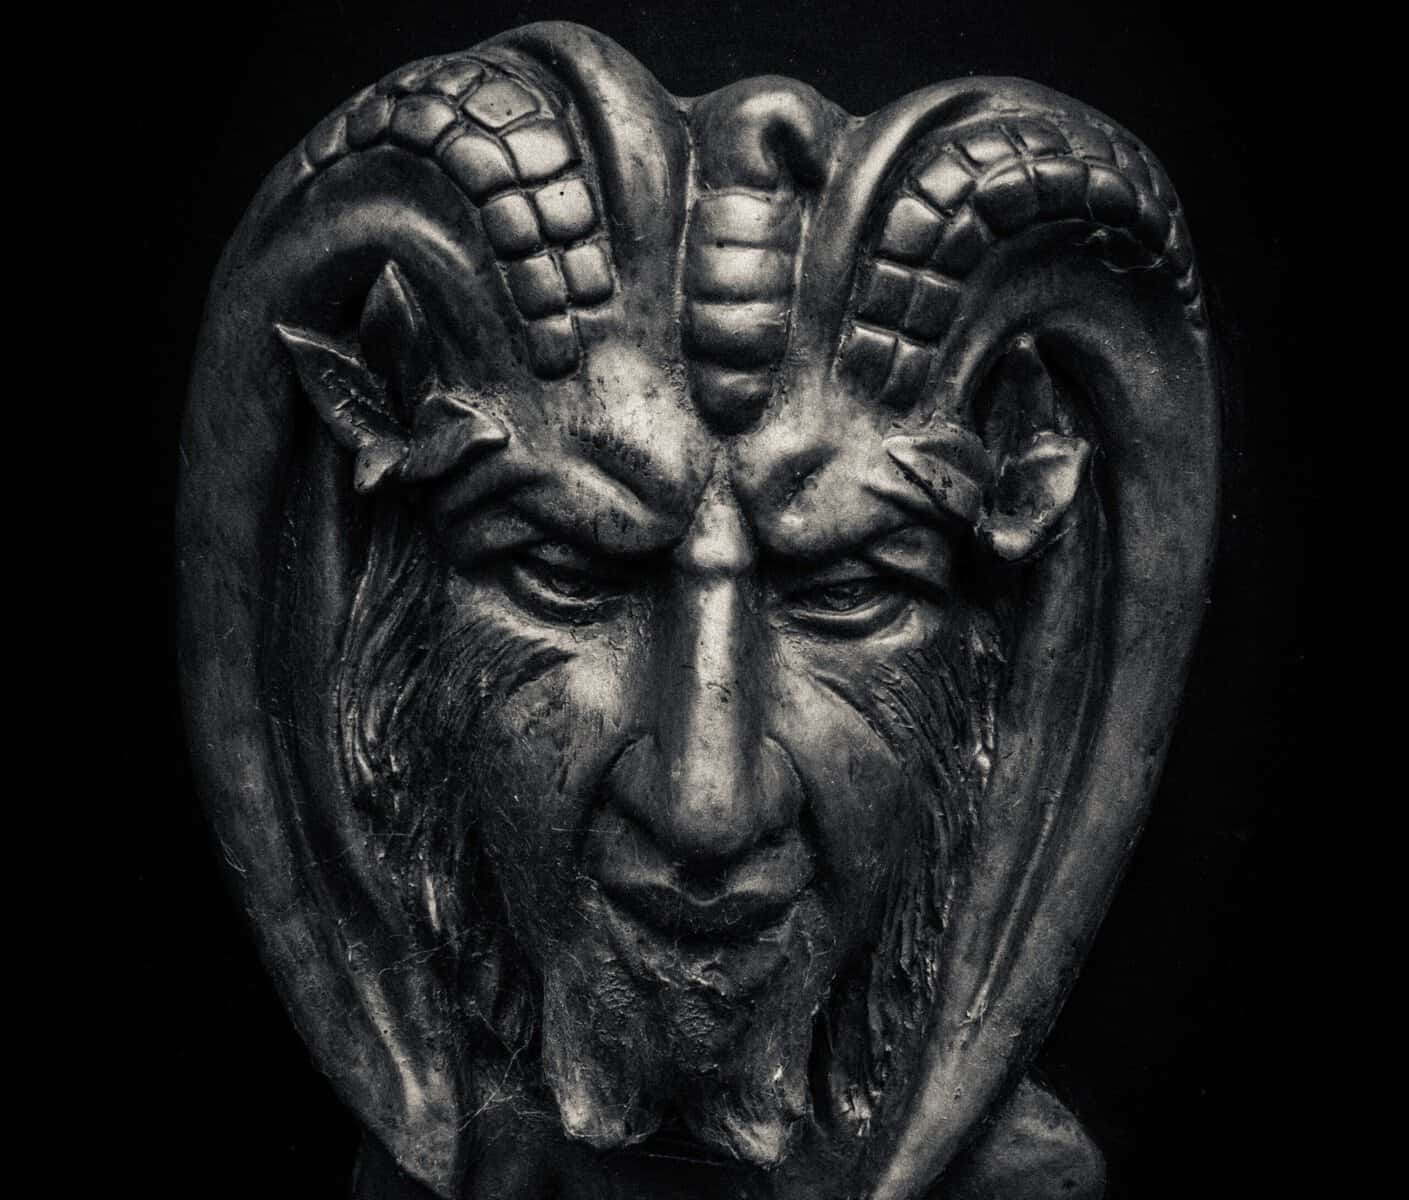 The face of a devil statue with ram horn is shown.